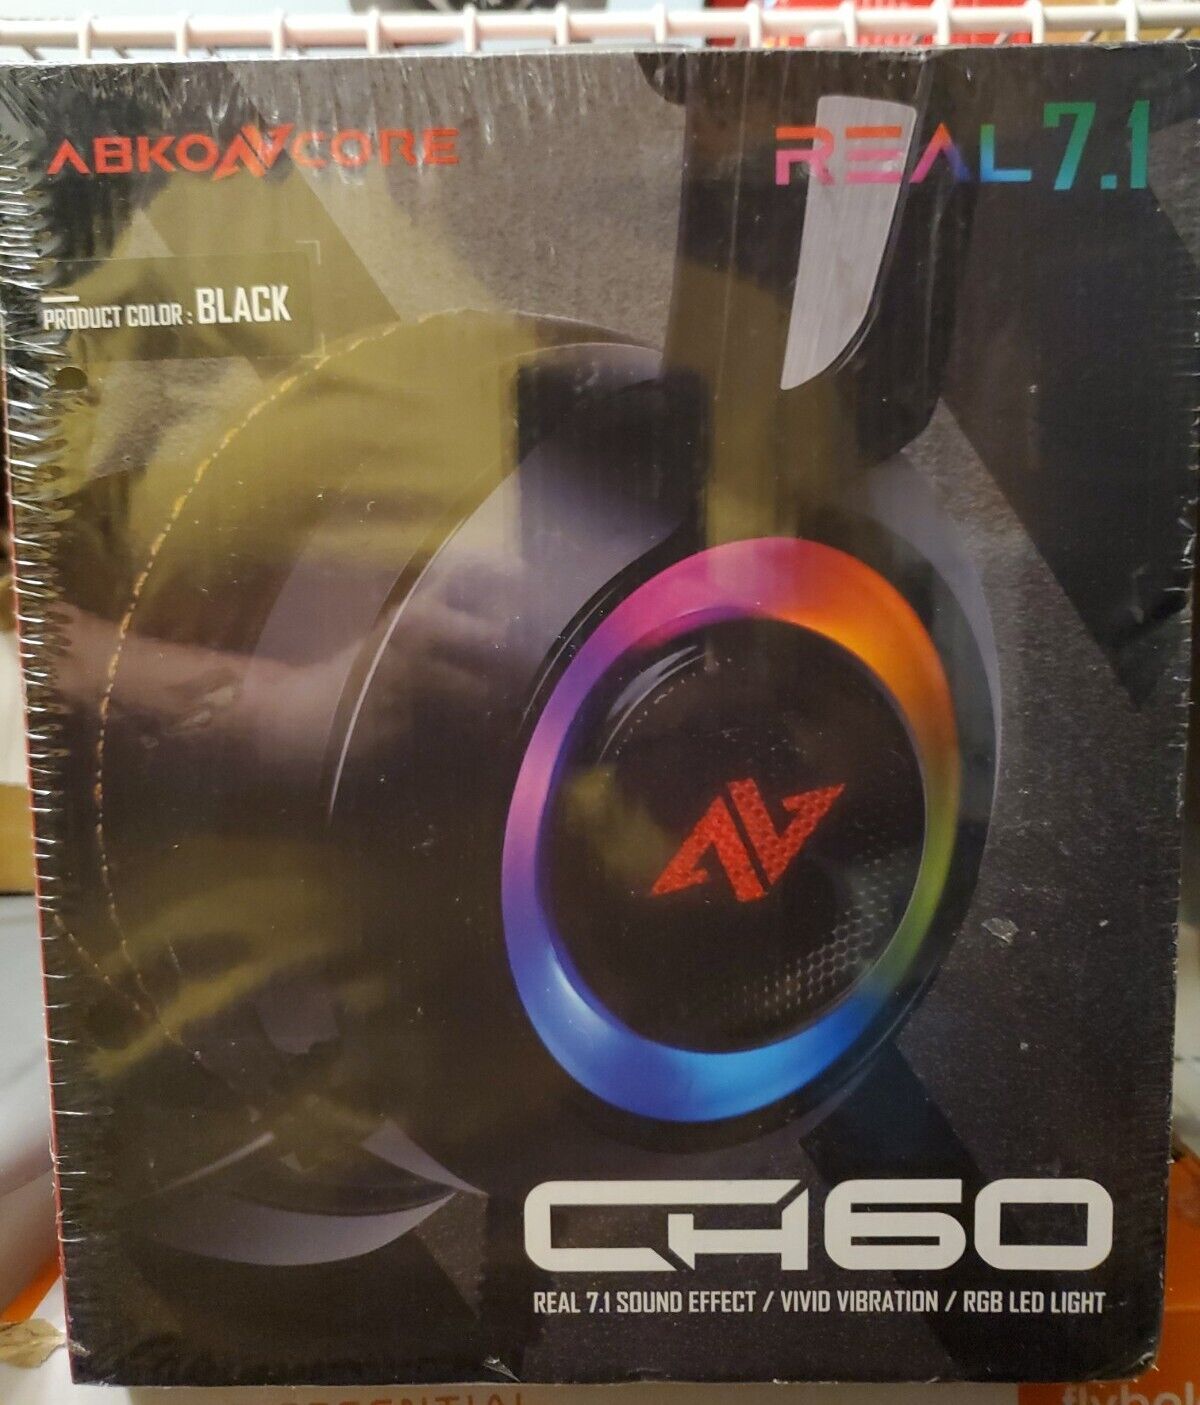 ABKONCORE CH60 Gaming Headset with True 7.1 Surround sound/Bass Vibration, USB